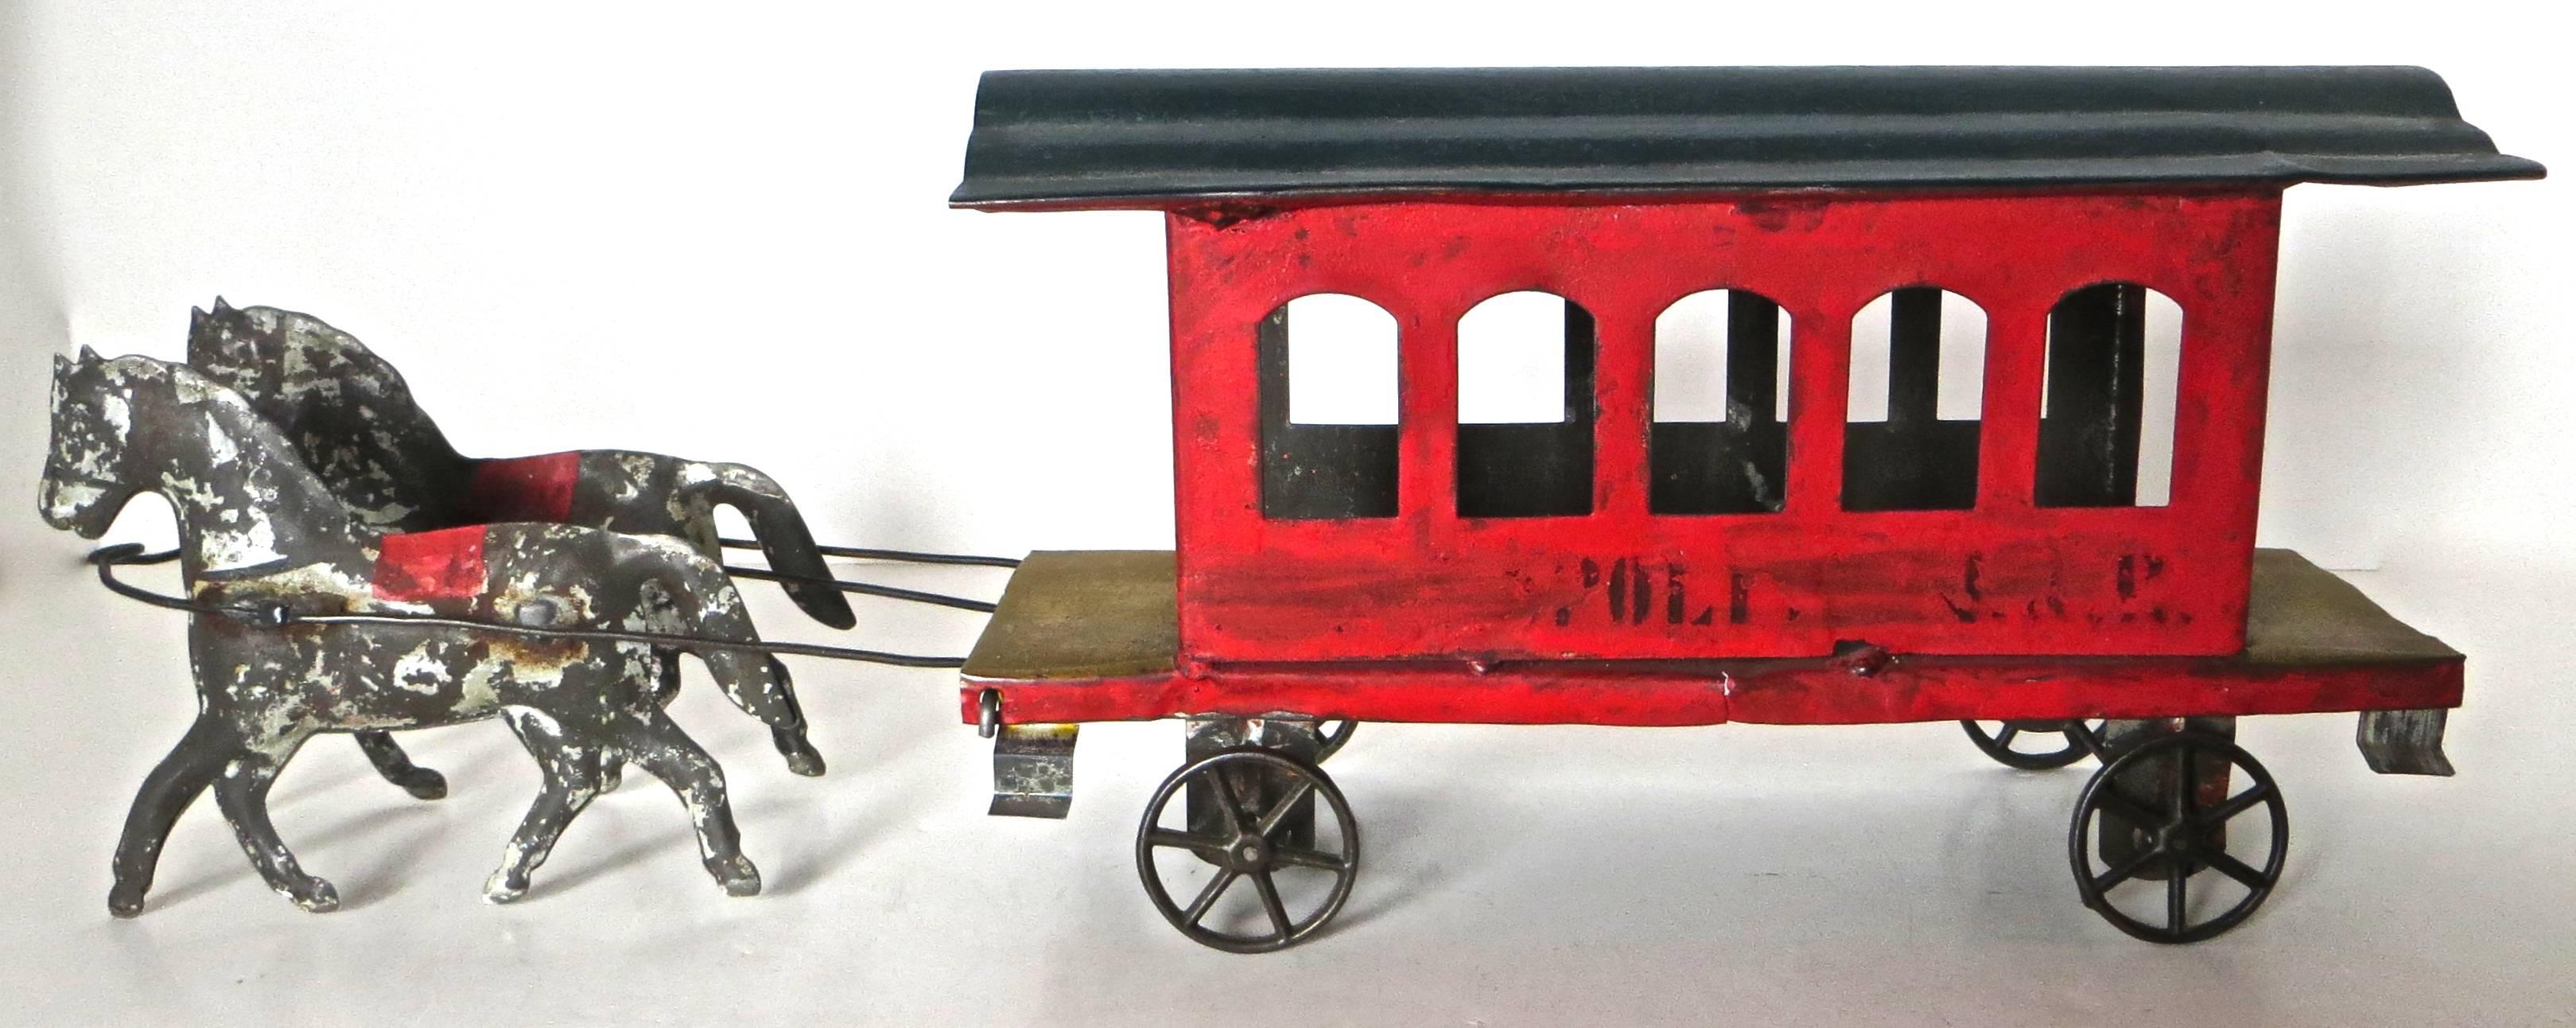 American Tin Toy Trolley, circa 1880 For Sale 1